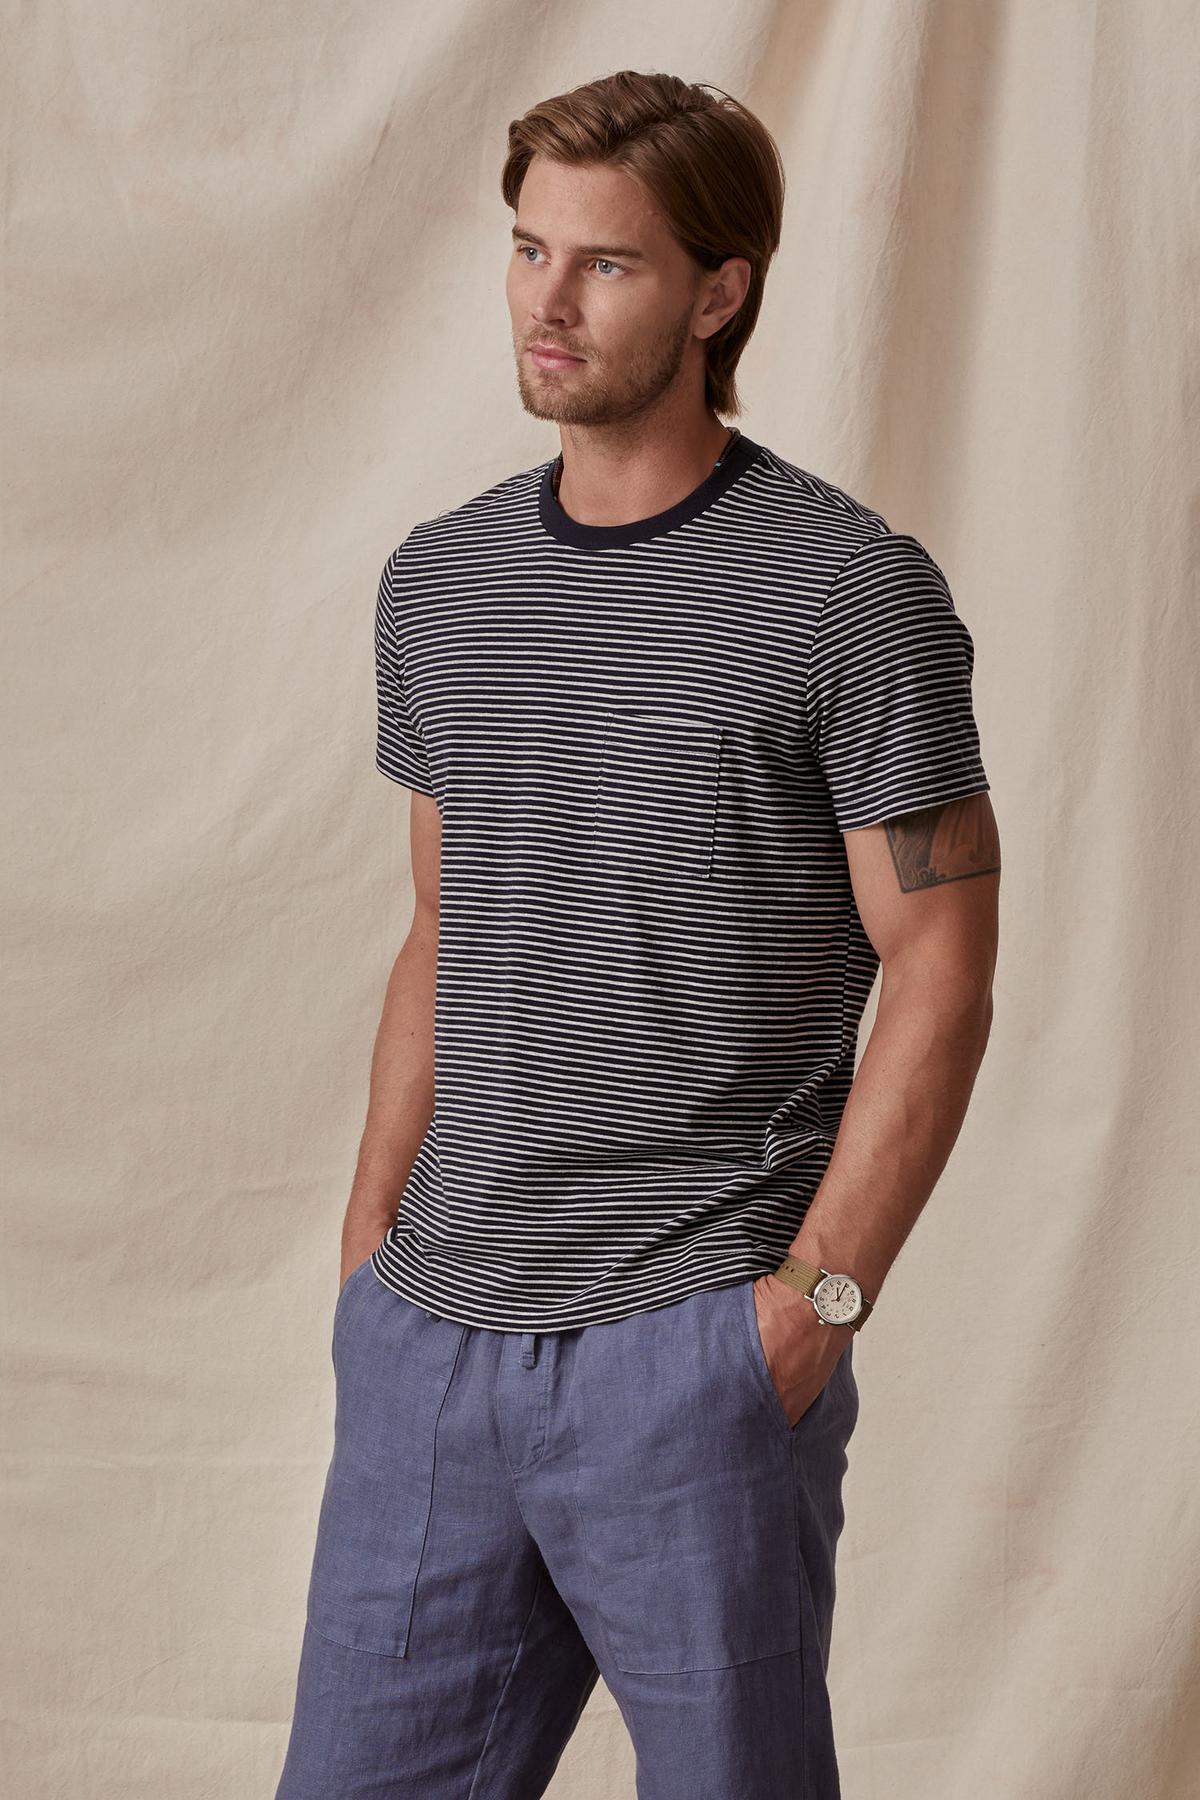 A man wearing a Velvet by Graham & Spencer CHAZZ TEE and blue trousers stands confidently, hands in pockets, against a neutral backdrop.-36732513026241